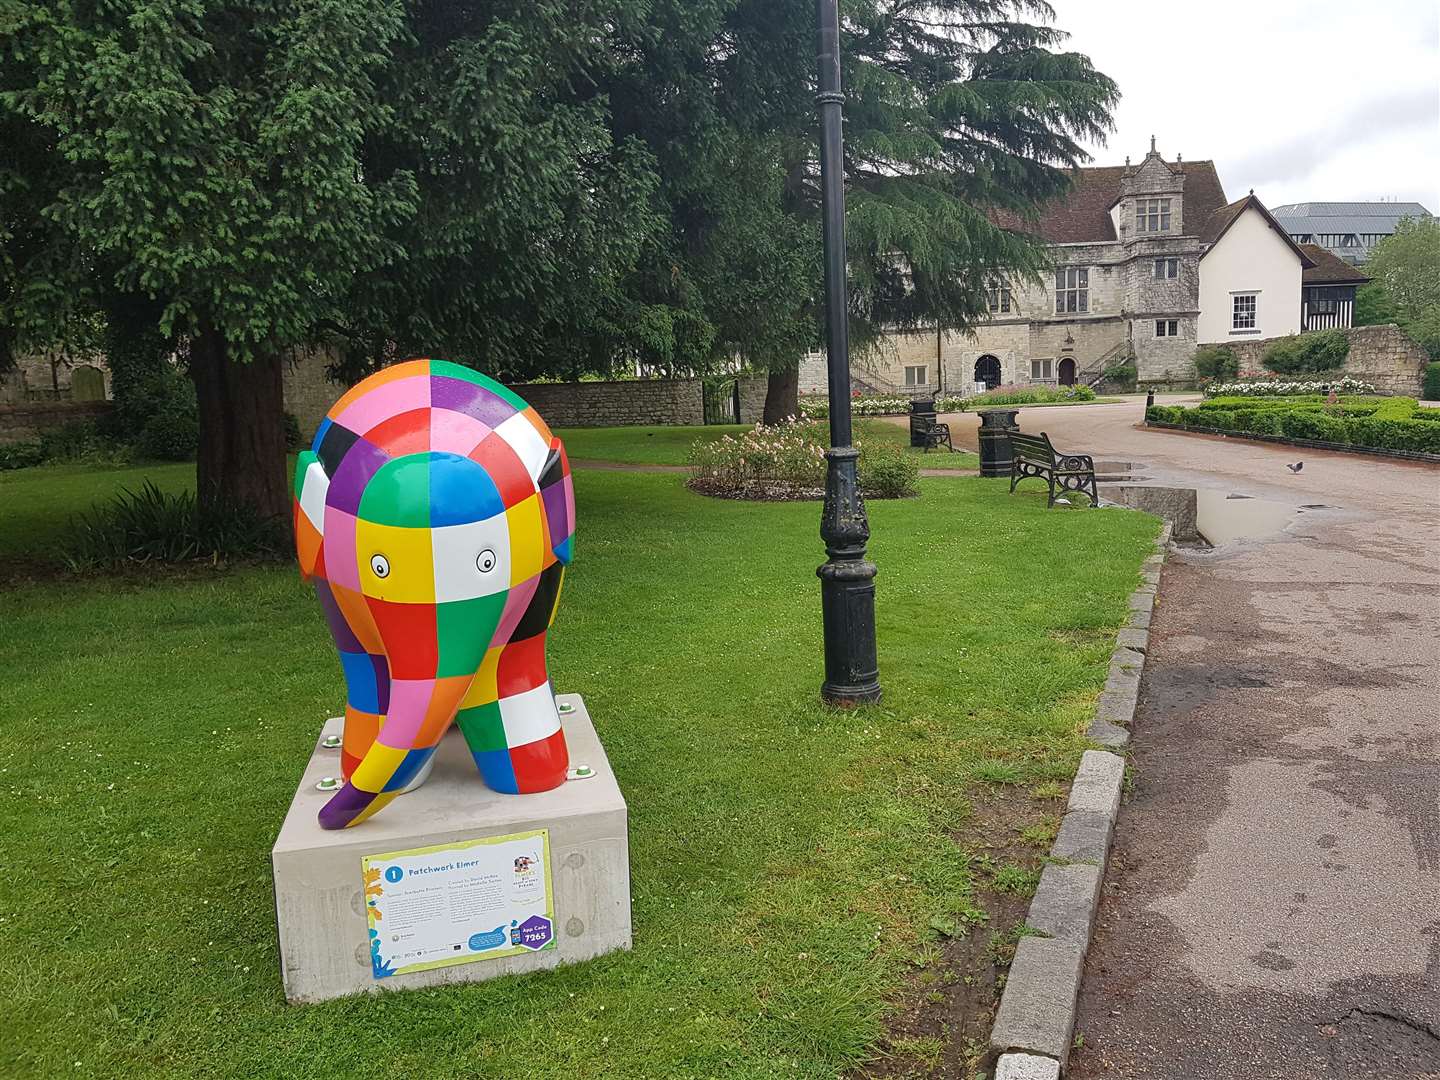 Heart of Kent Hospice will receive the Special Recognition Award for its parade of Elmer statues across Maidstone